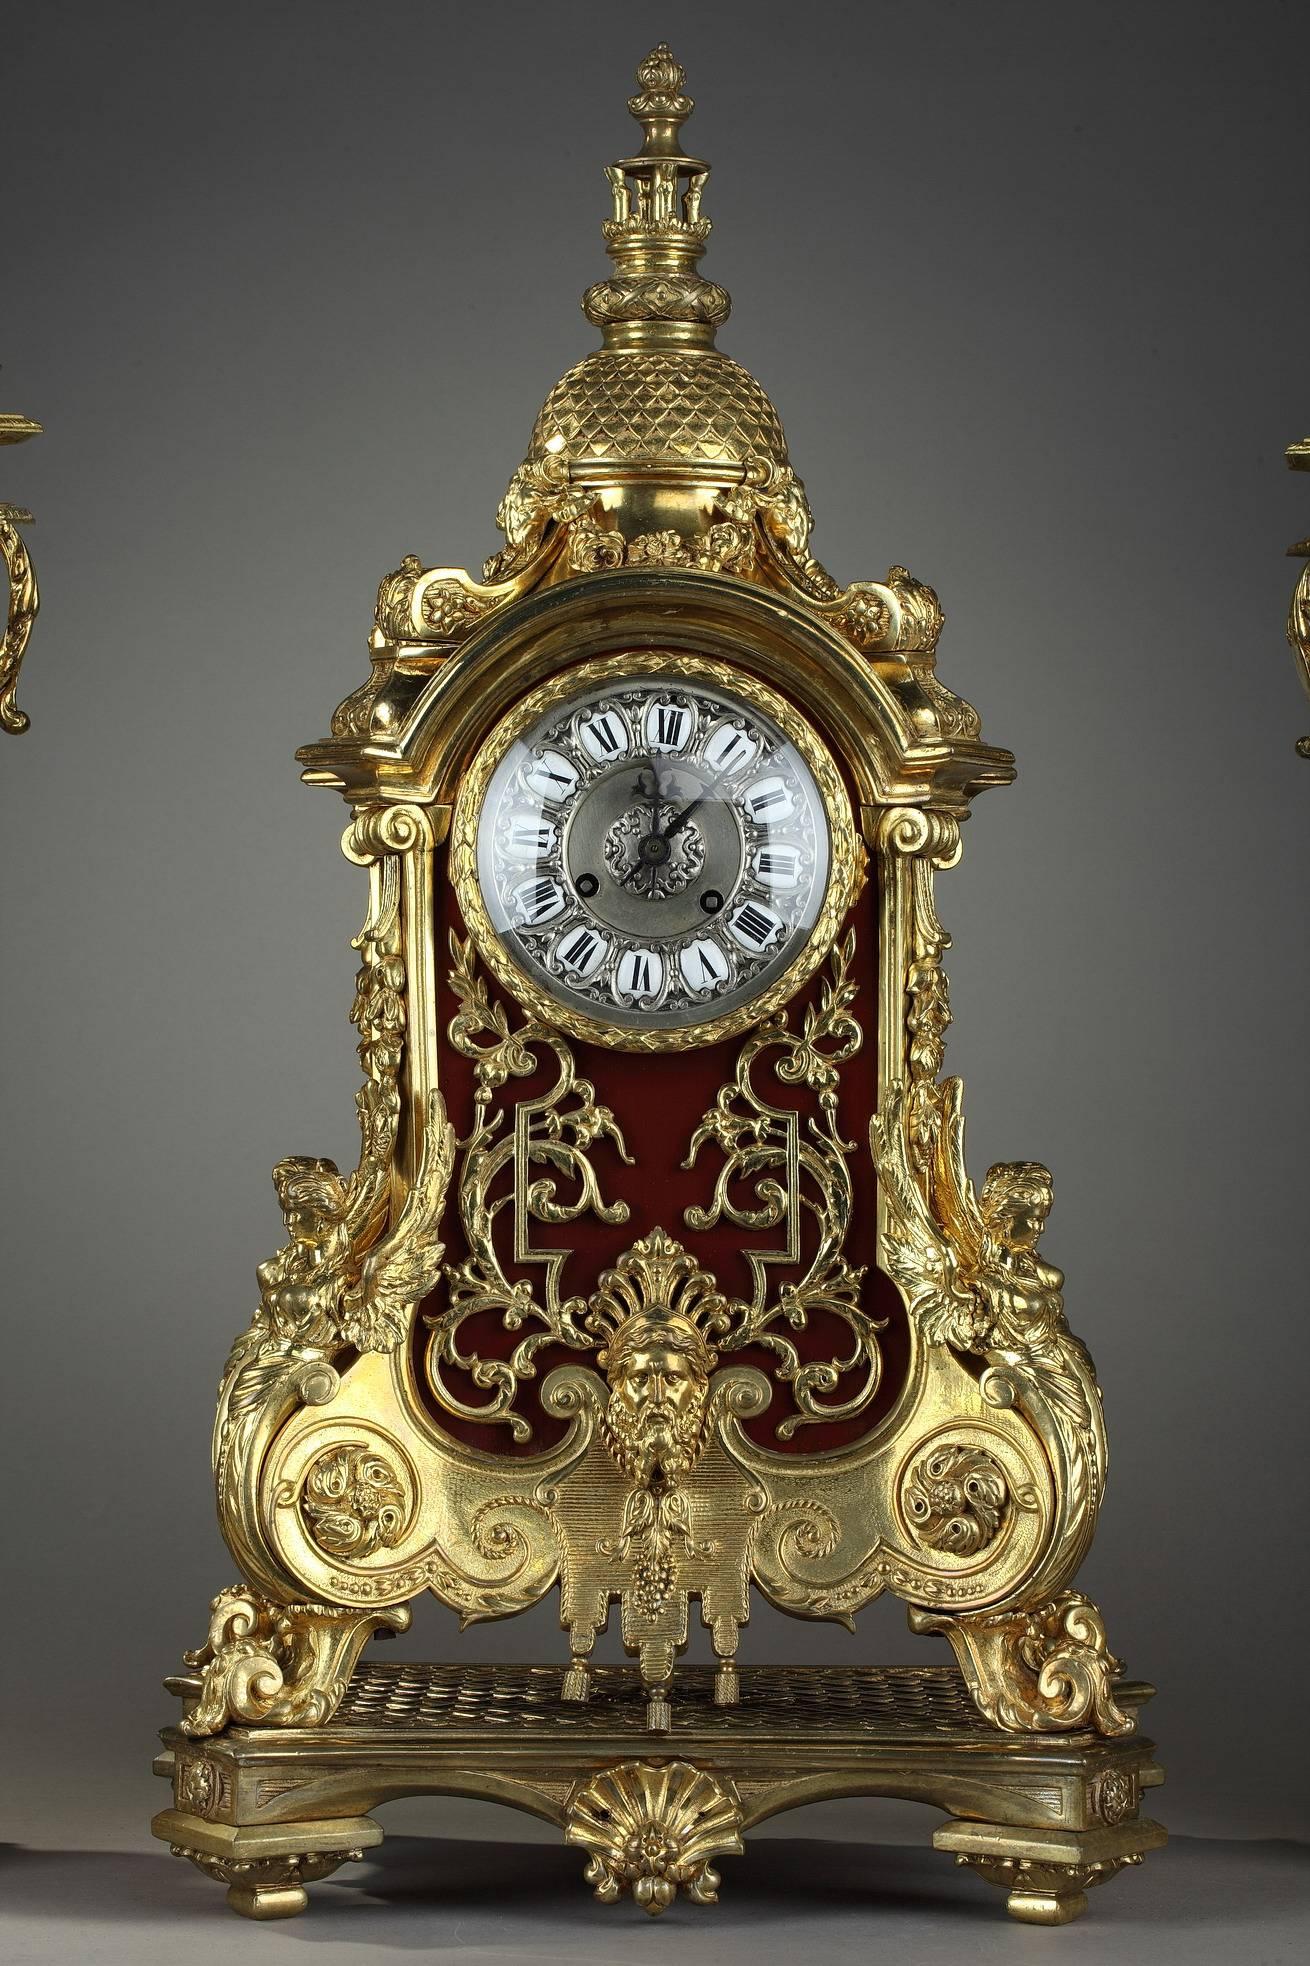 Gilt bronze and varnished wood set richly decorated with masks, foliages and floral motifs. It is composed of a mantel clock and two candlesticks topped by a dome. The silver dial is decorated with 12 white enameled cartouches with Roman numerals